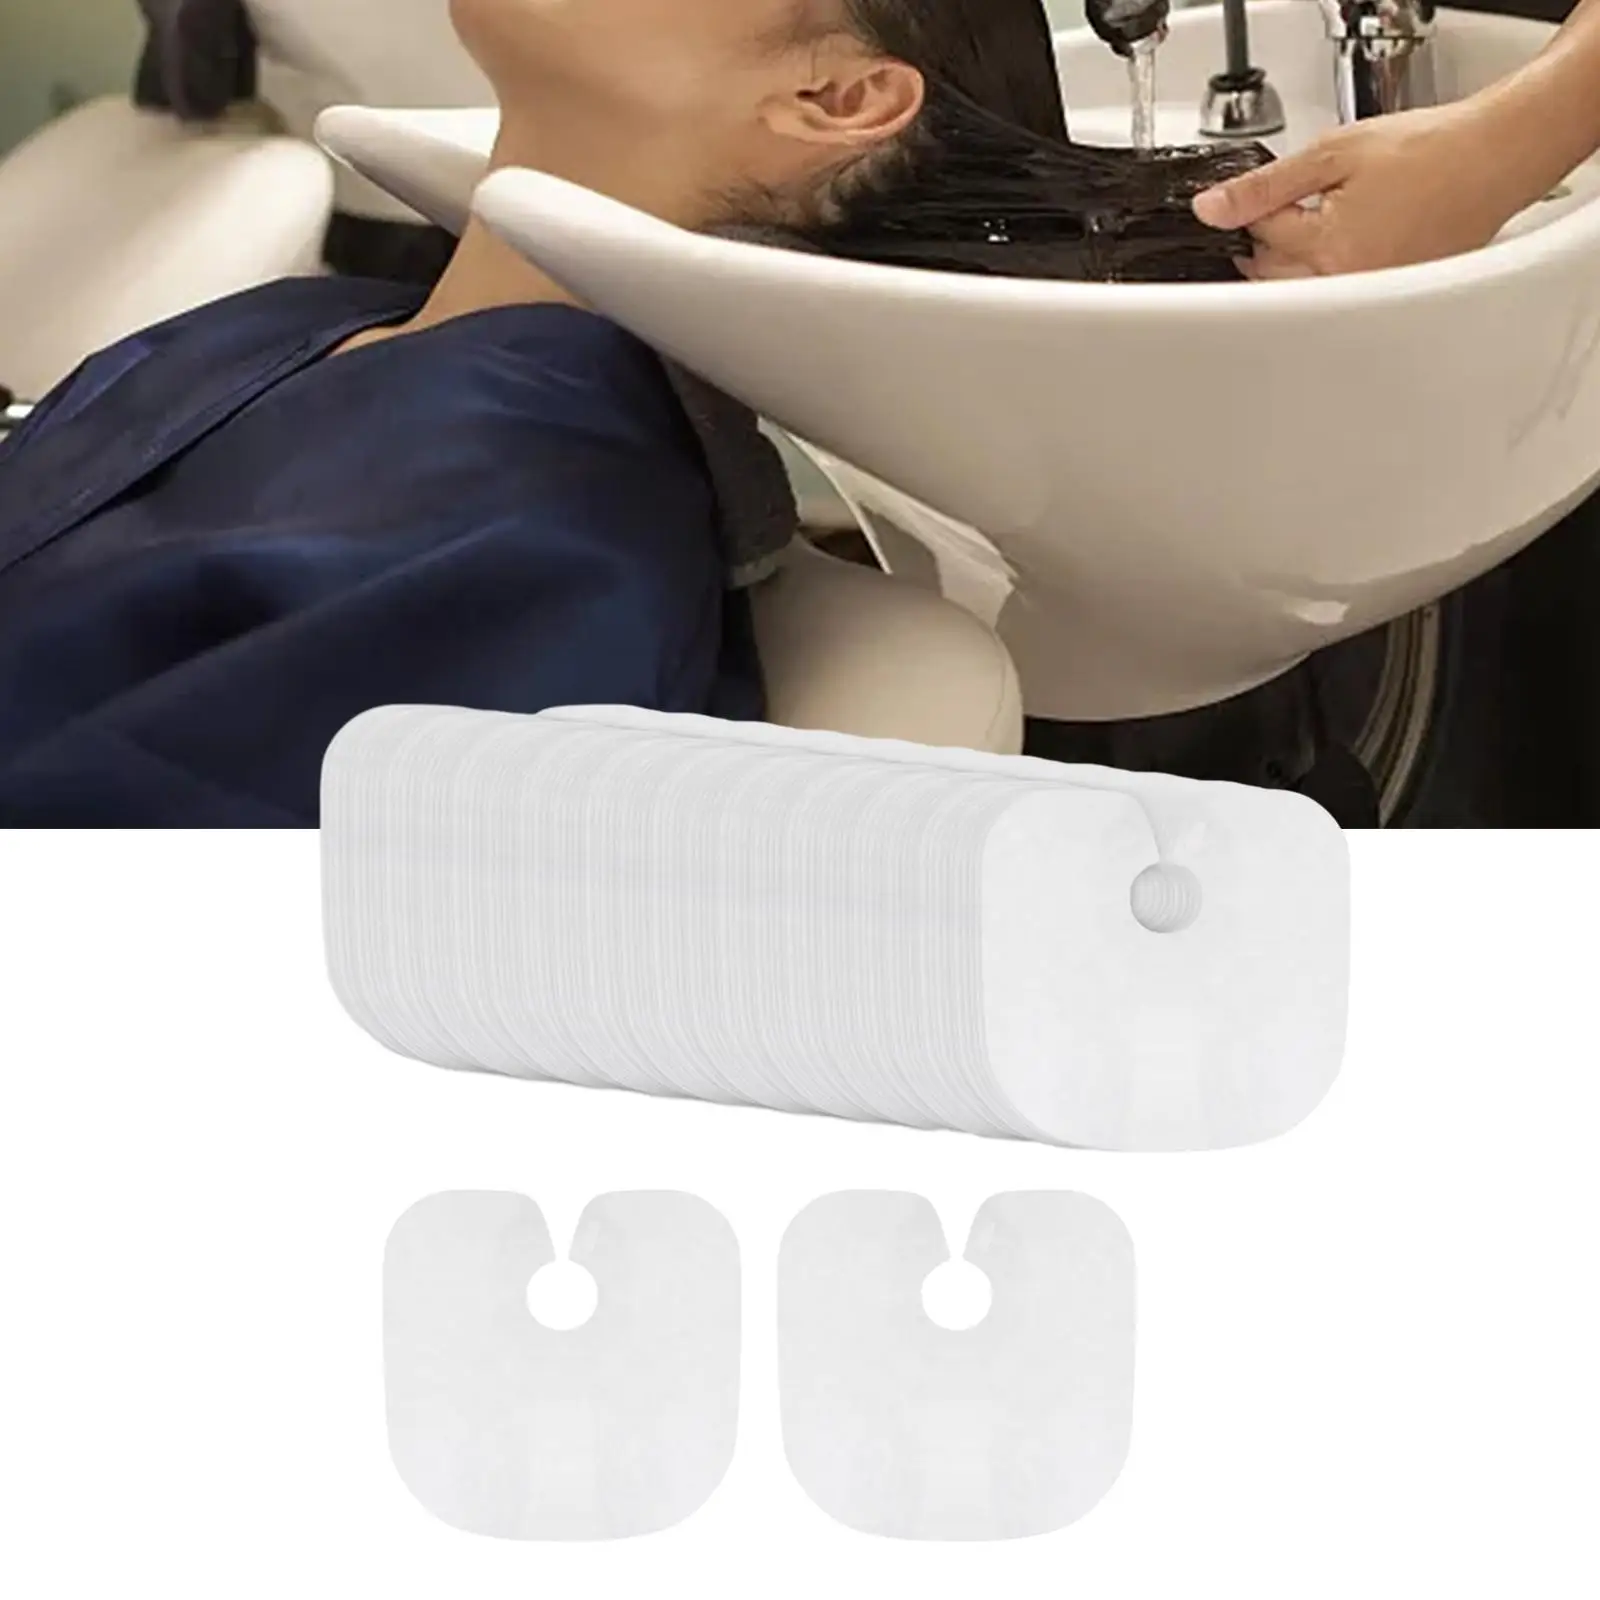 Disposable Salon Cape Apron Protects Waterproof Disposable Barber Cape Accessory for Barbers Salon Hairdressing Salon Chair Kids